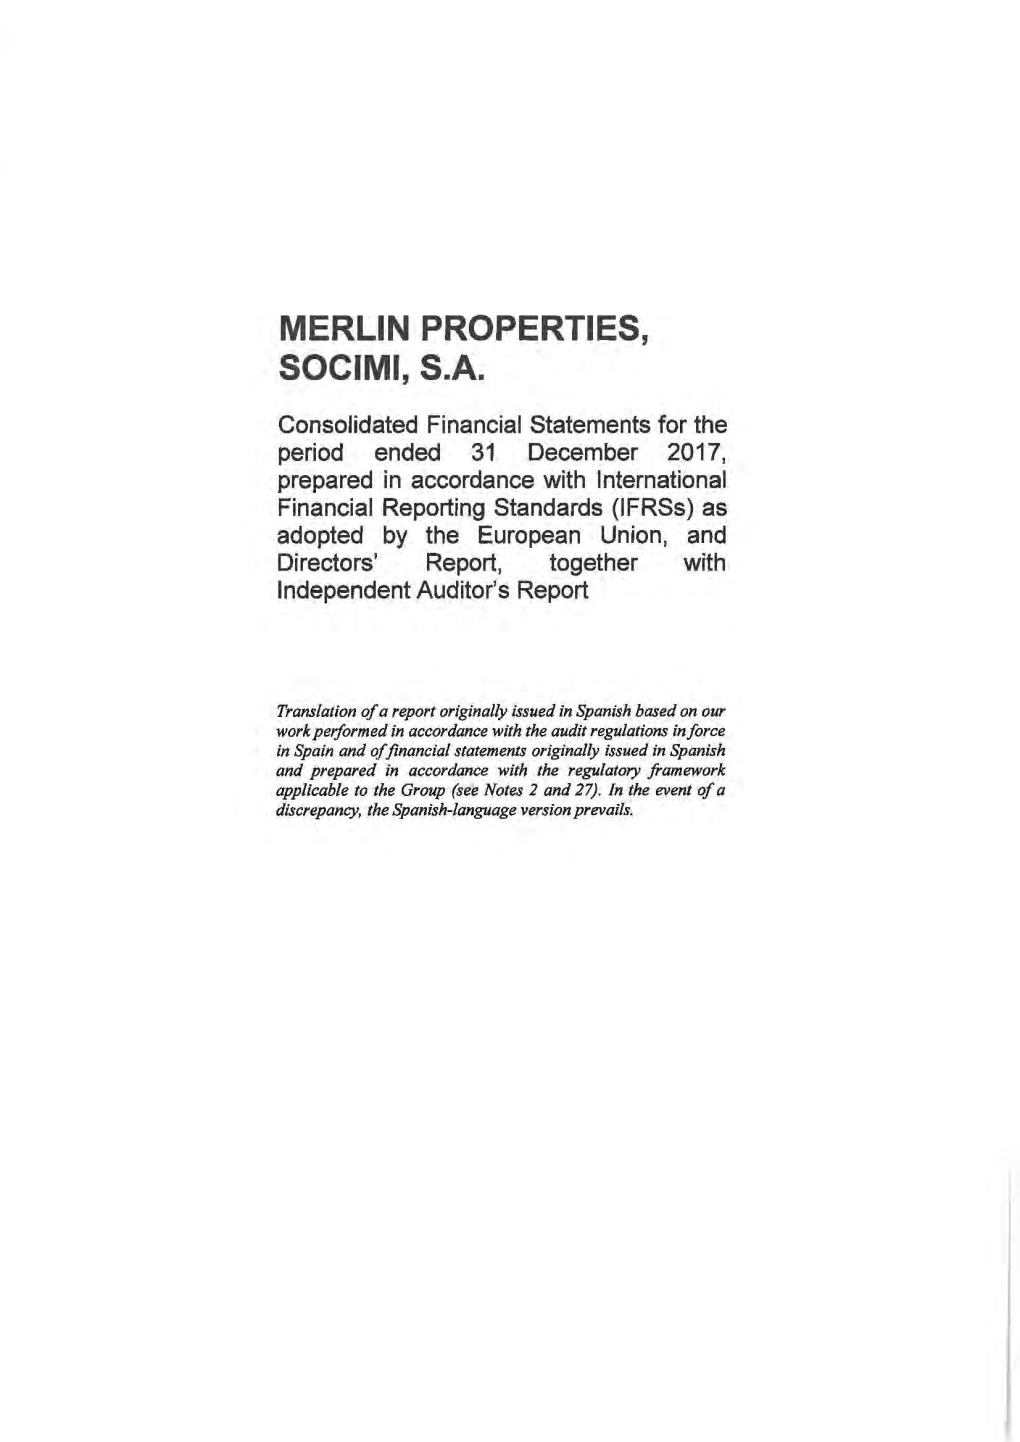 Consolidated Financial Statements – MERLIN Properties 2017